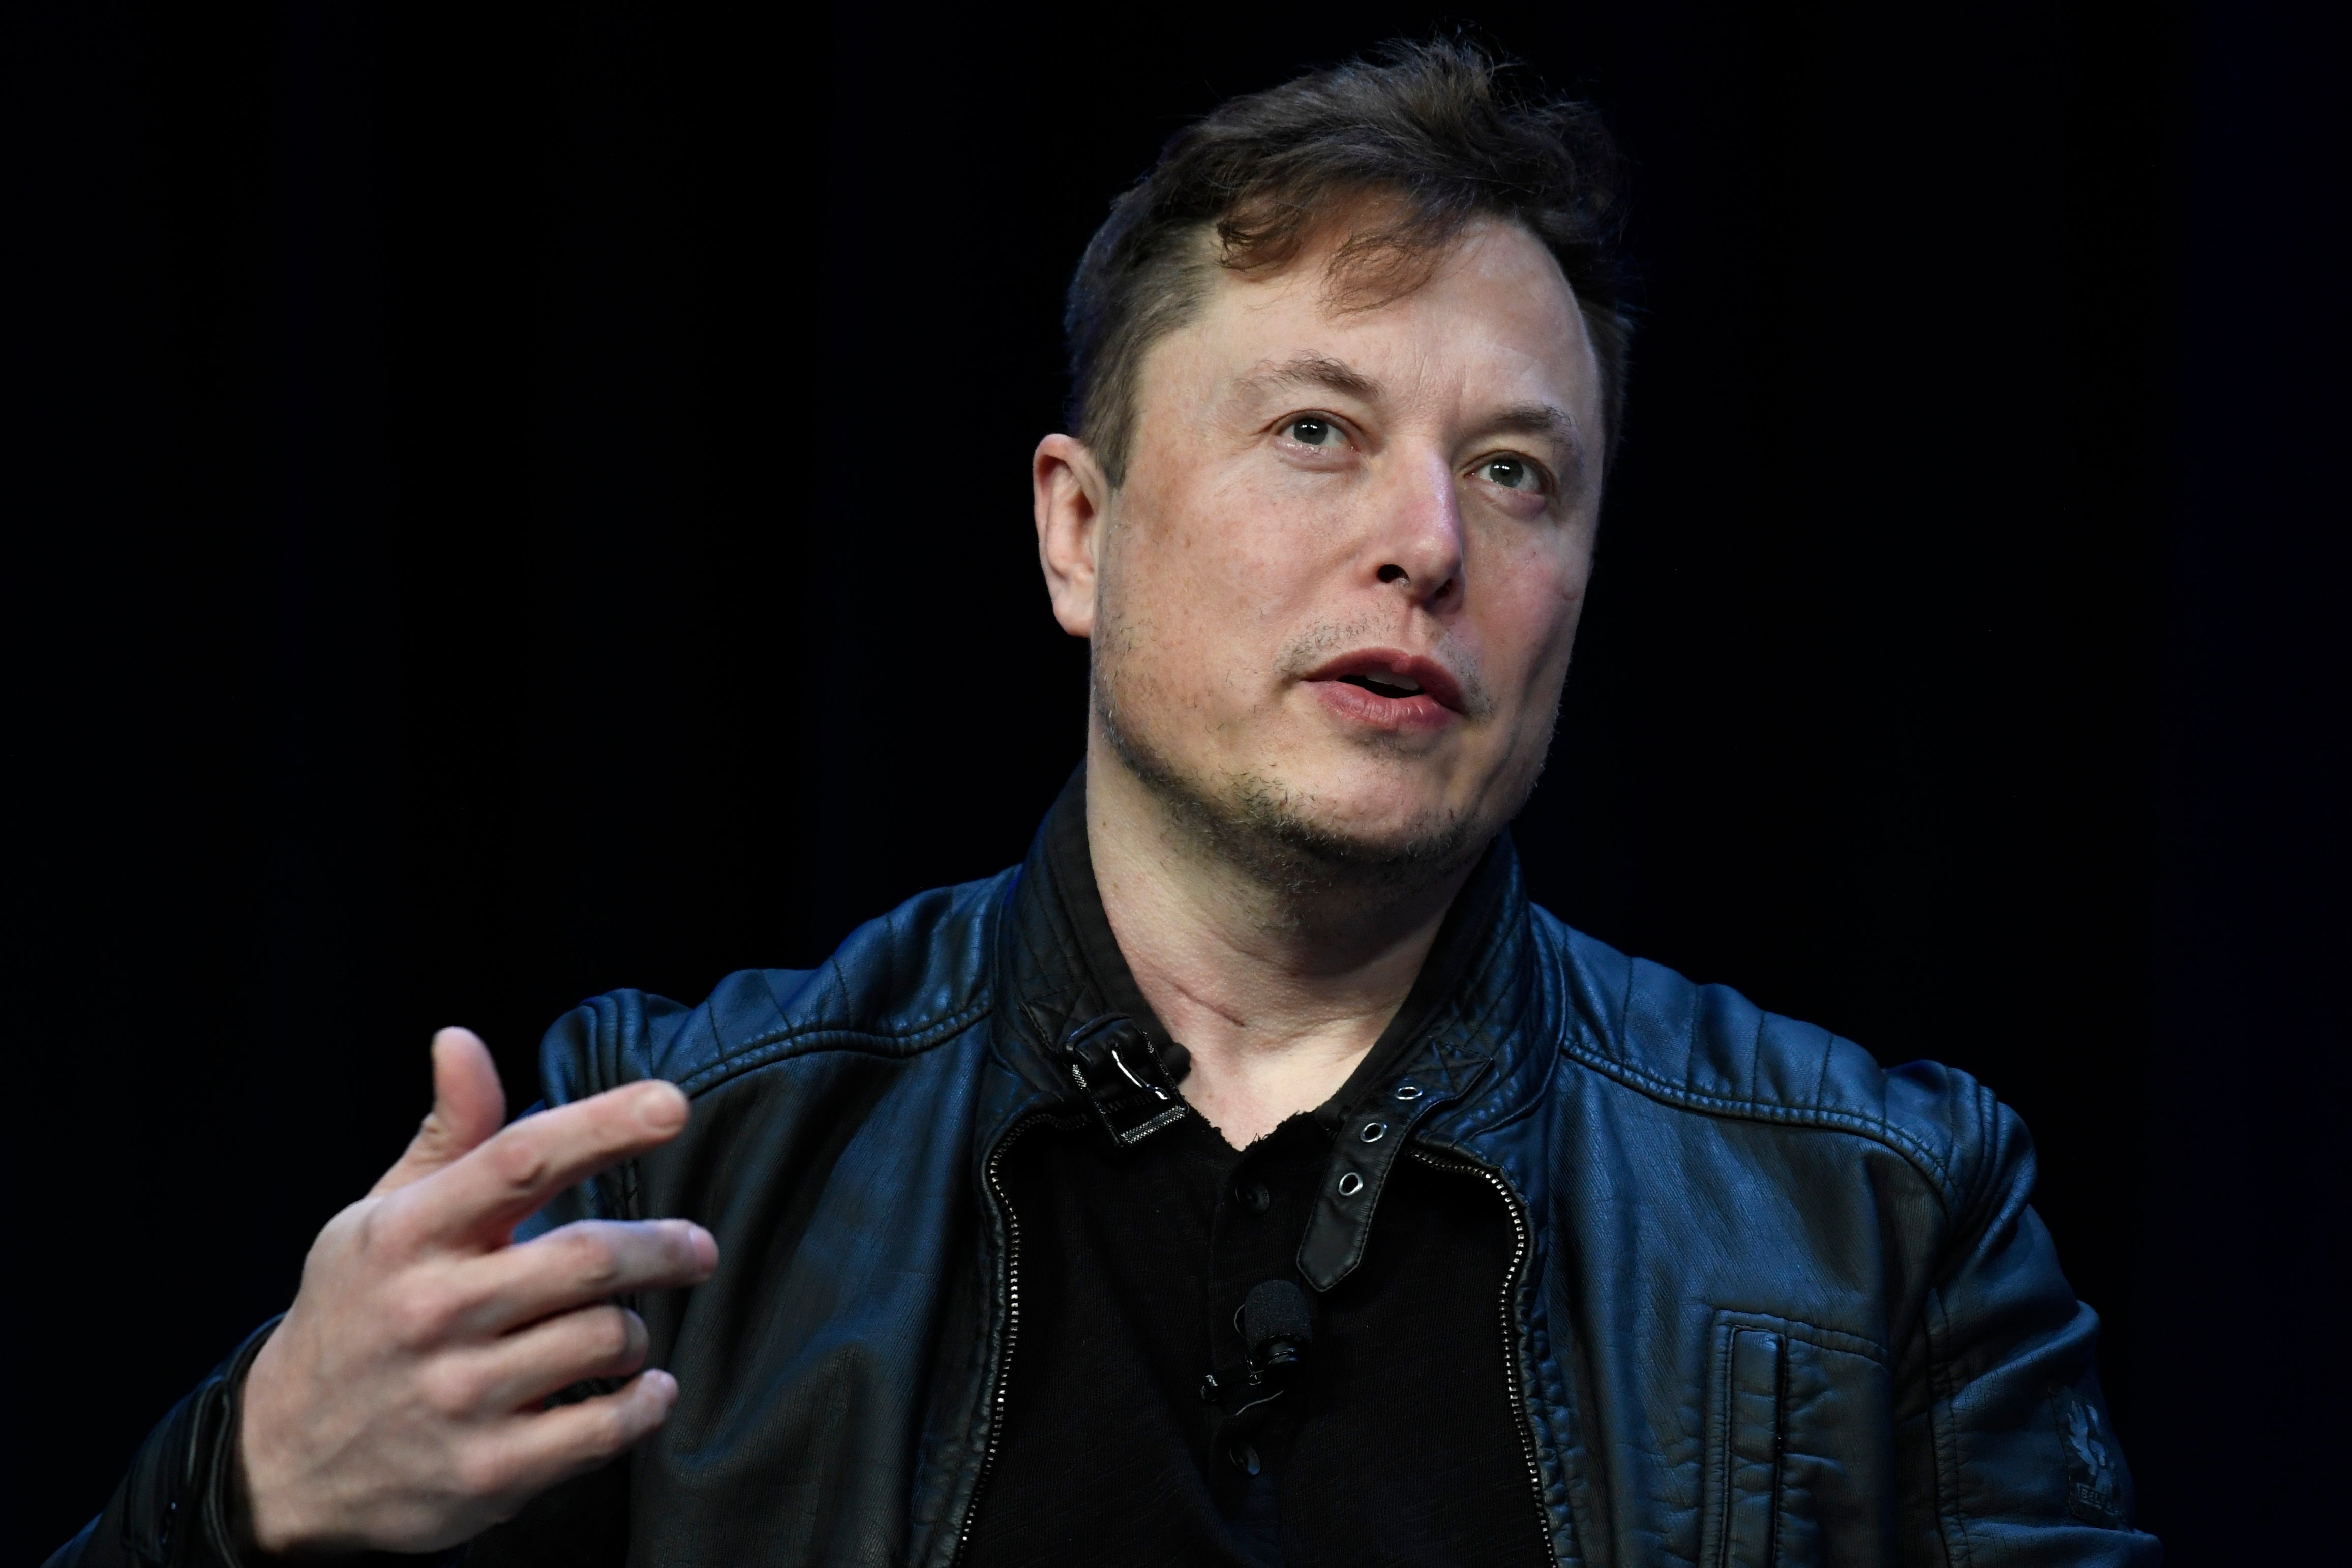 Elon Musk shared the video boasting no human input was required